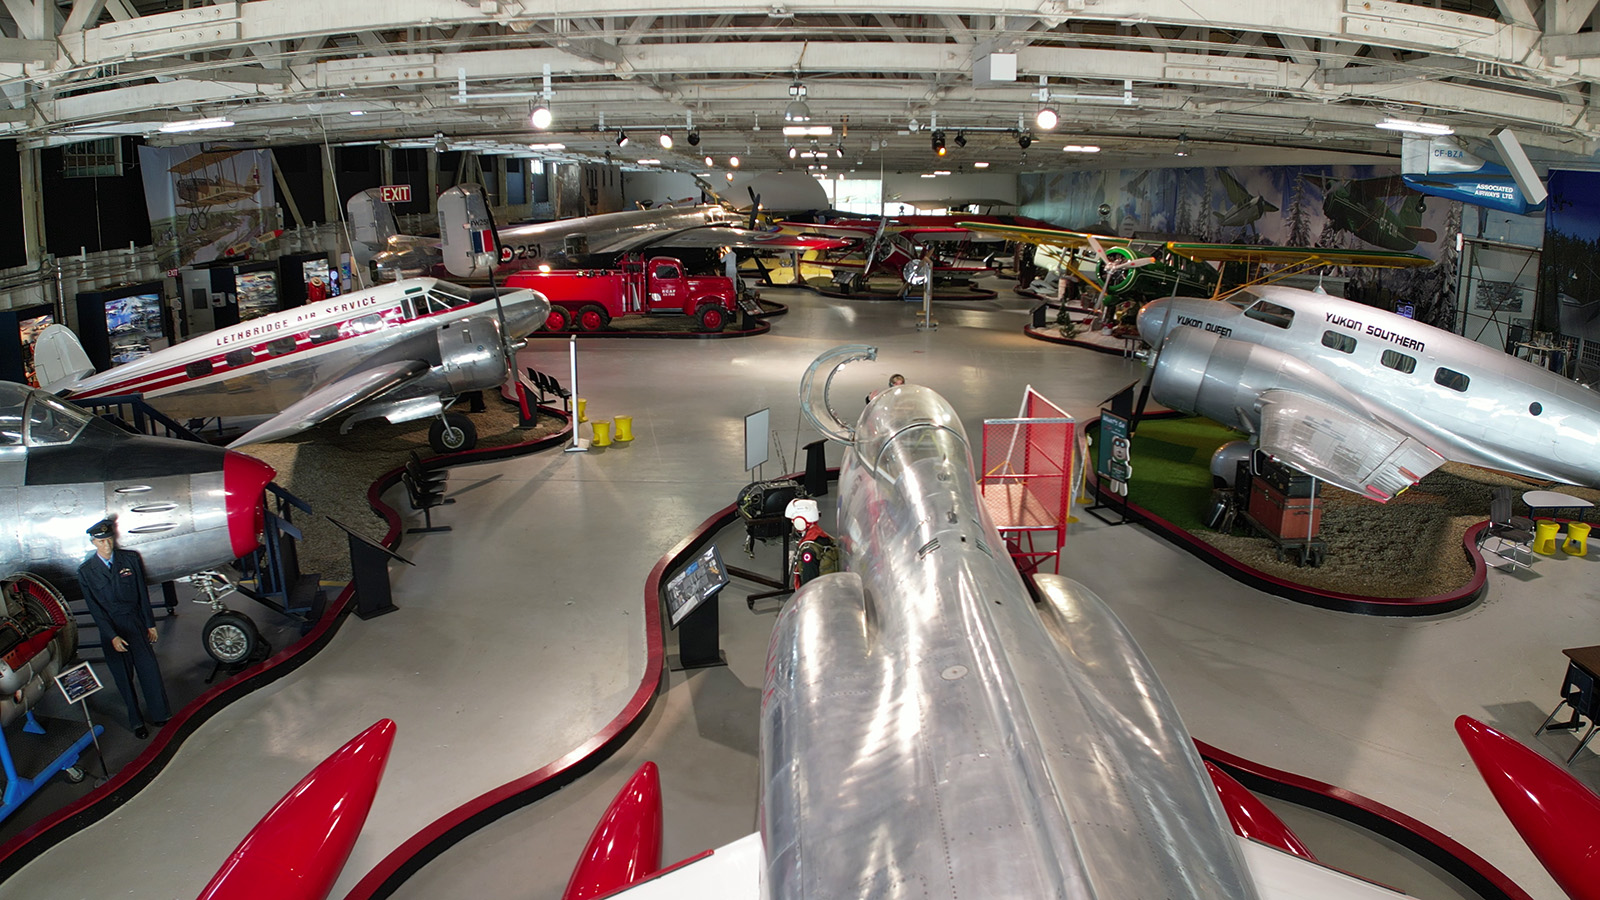 Aircraft and vehicles inside the Alberta Aviation Museum.